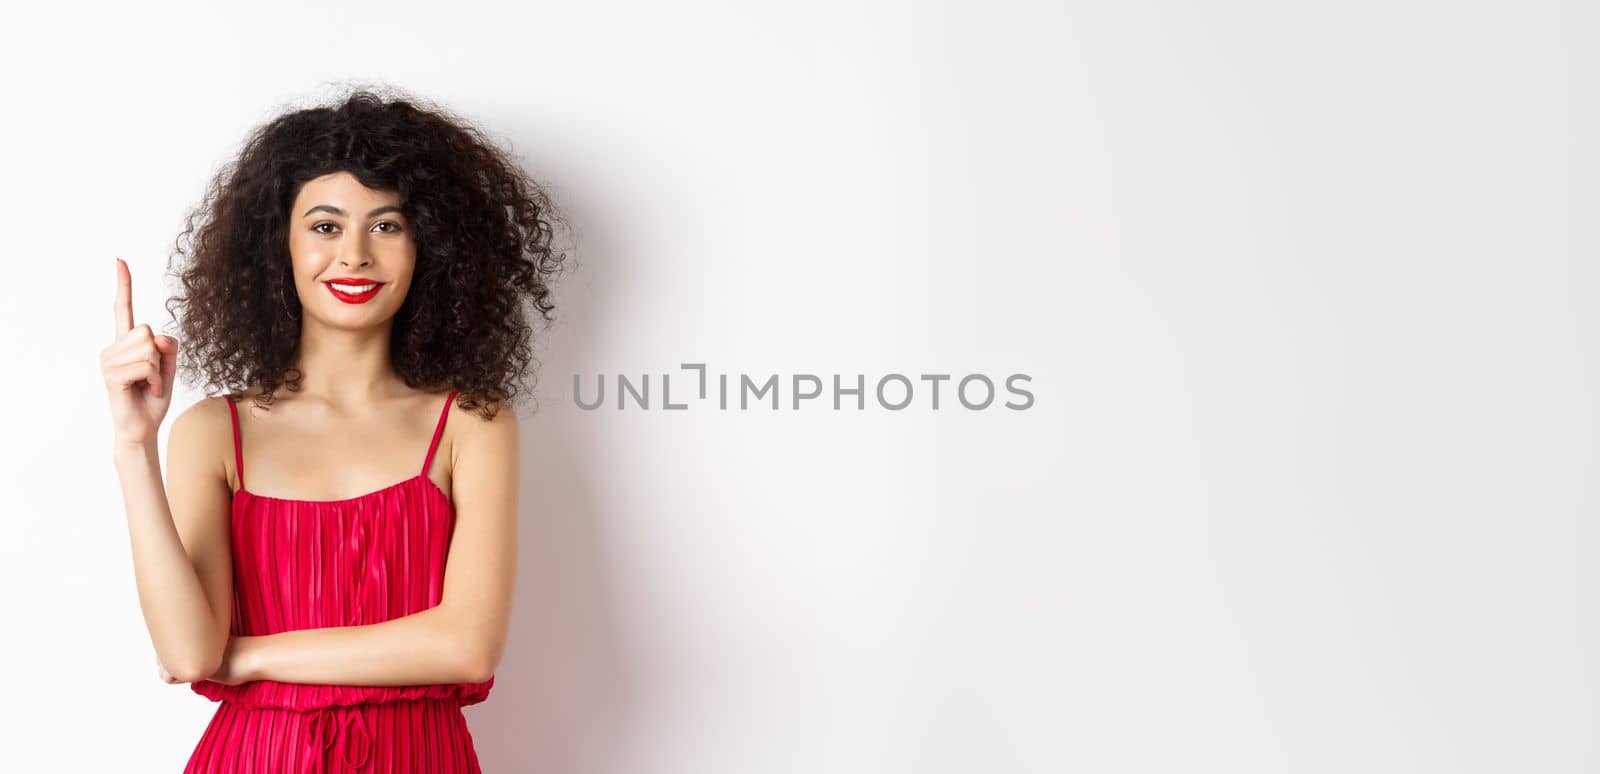 Beautiful smiling lady in red dress showing number one, raising finger and looking pleased, standing over white background.